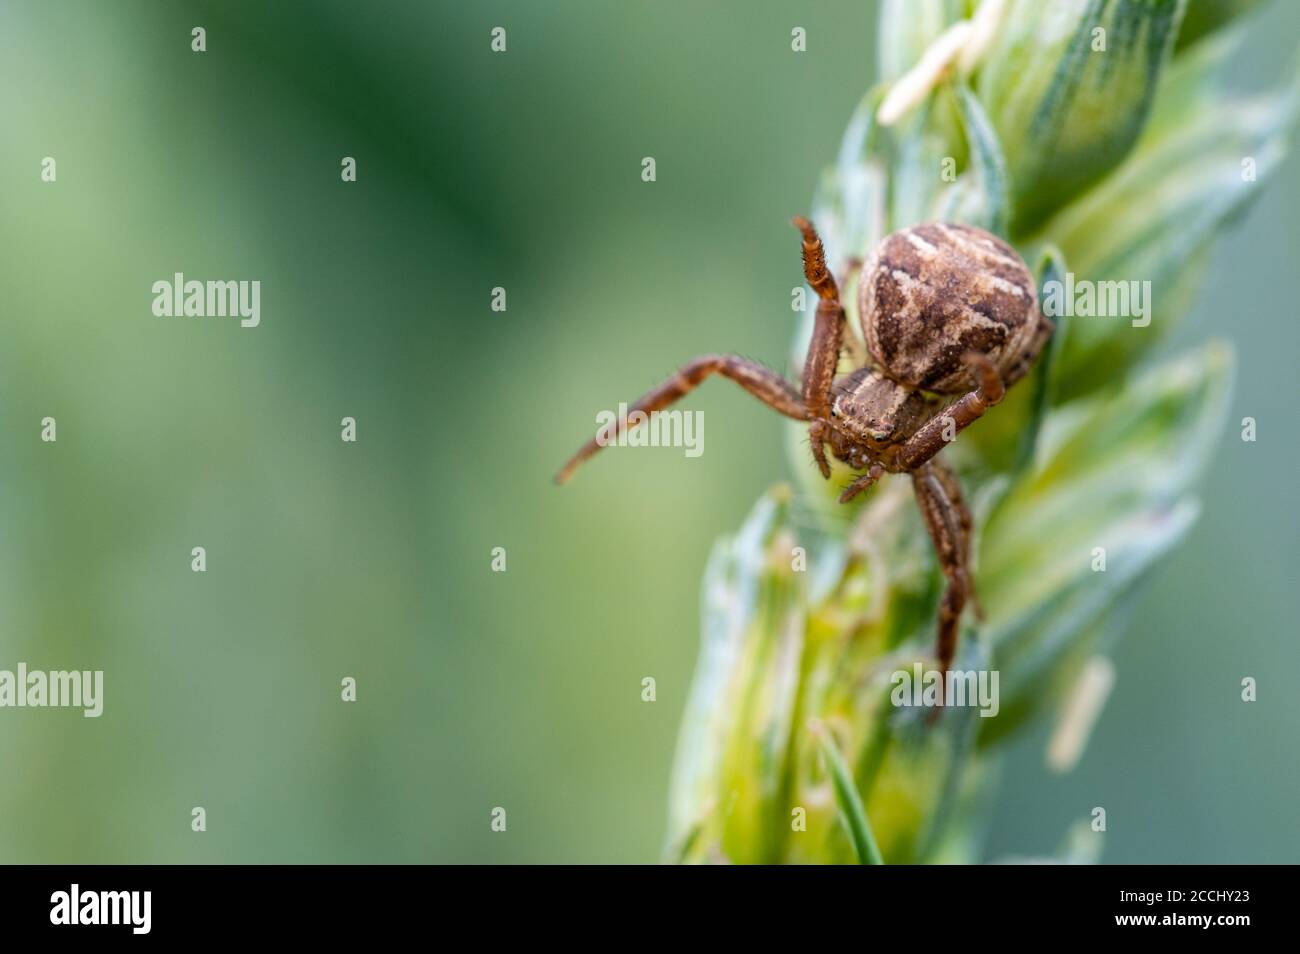 A spider known as the crab spiders (xysticus) crawling on a blade of grass and waiting for prey. Macro, green blurred background. Stock Photo